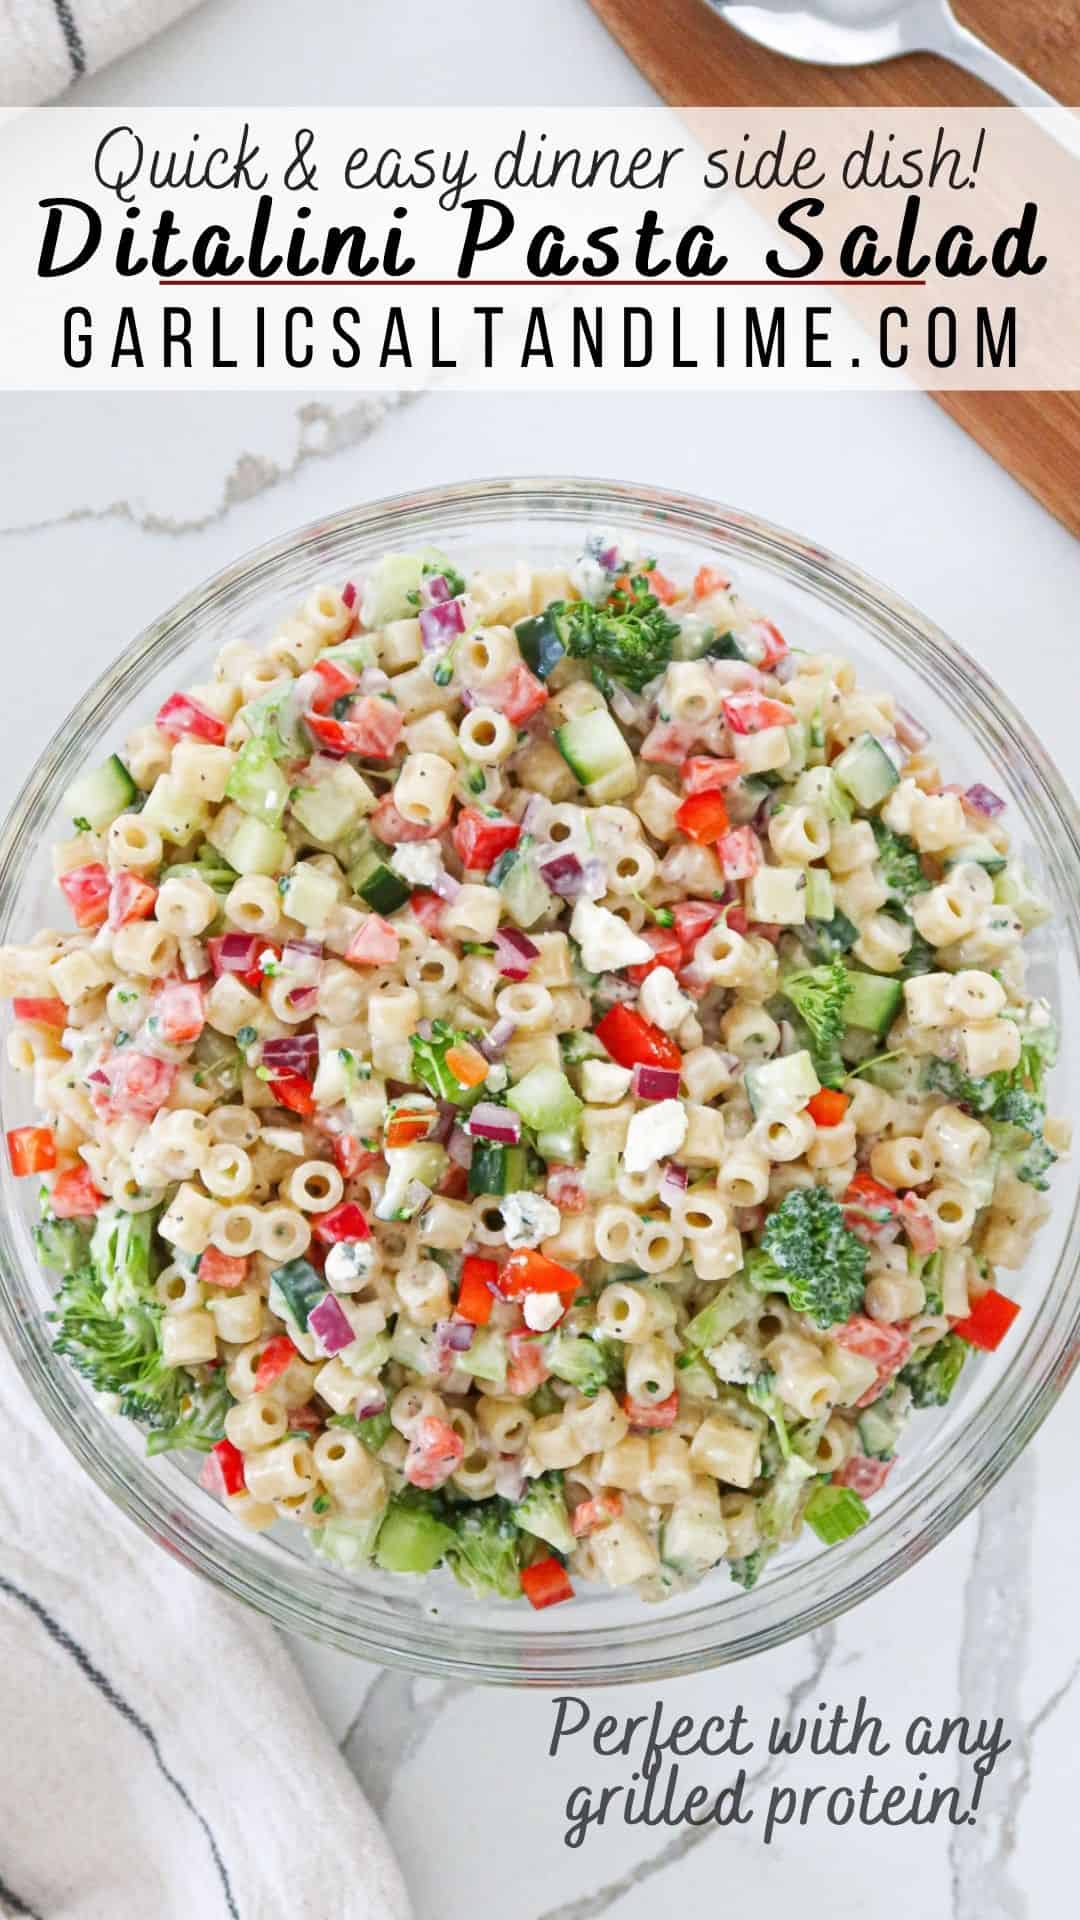 Ditalini pasta salad in a glass bowl with text overlay for Pinterest.